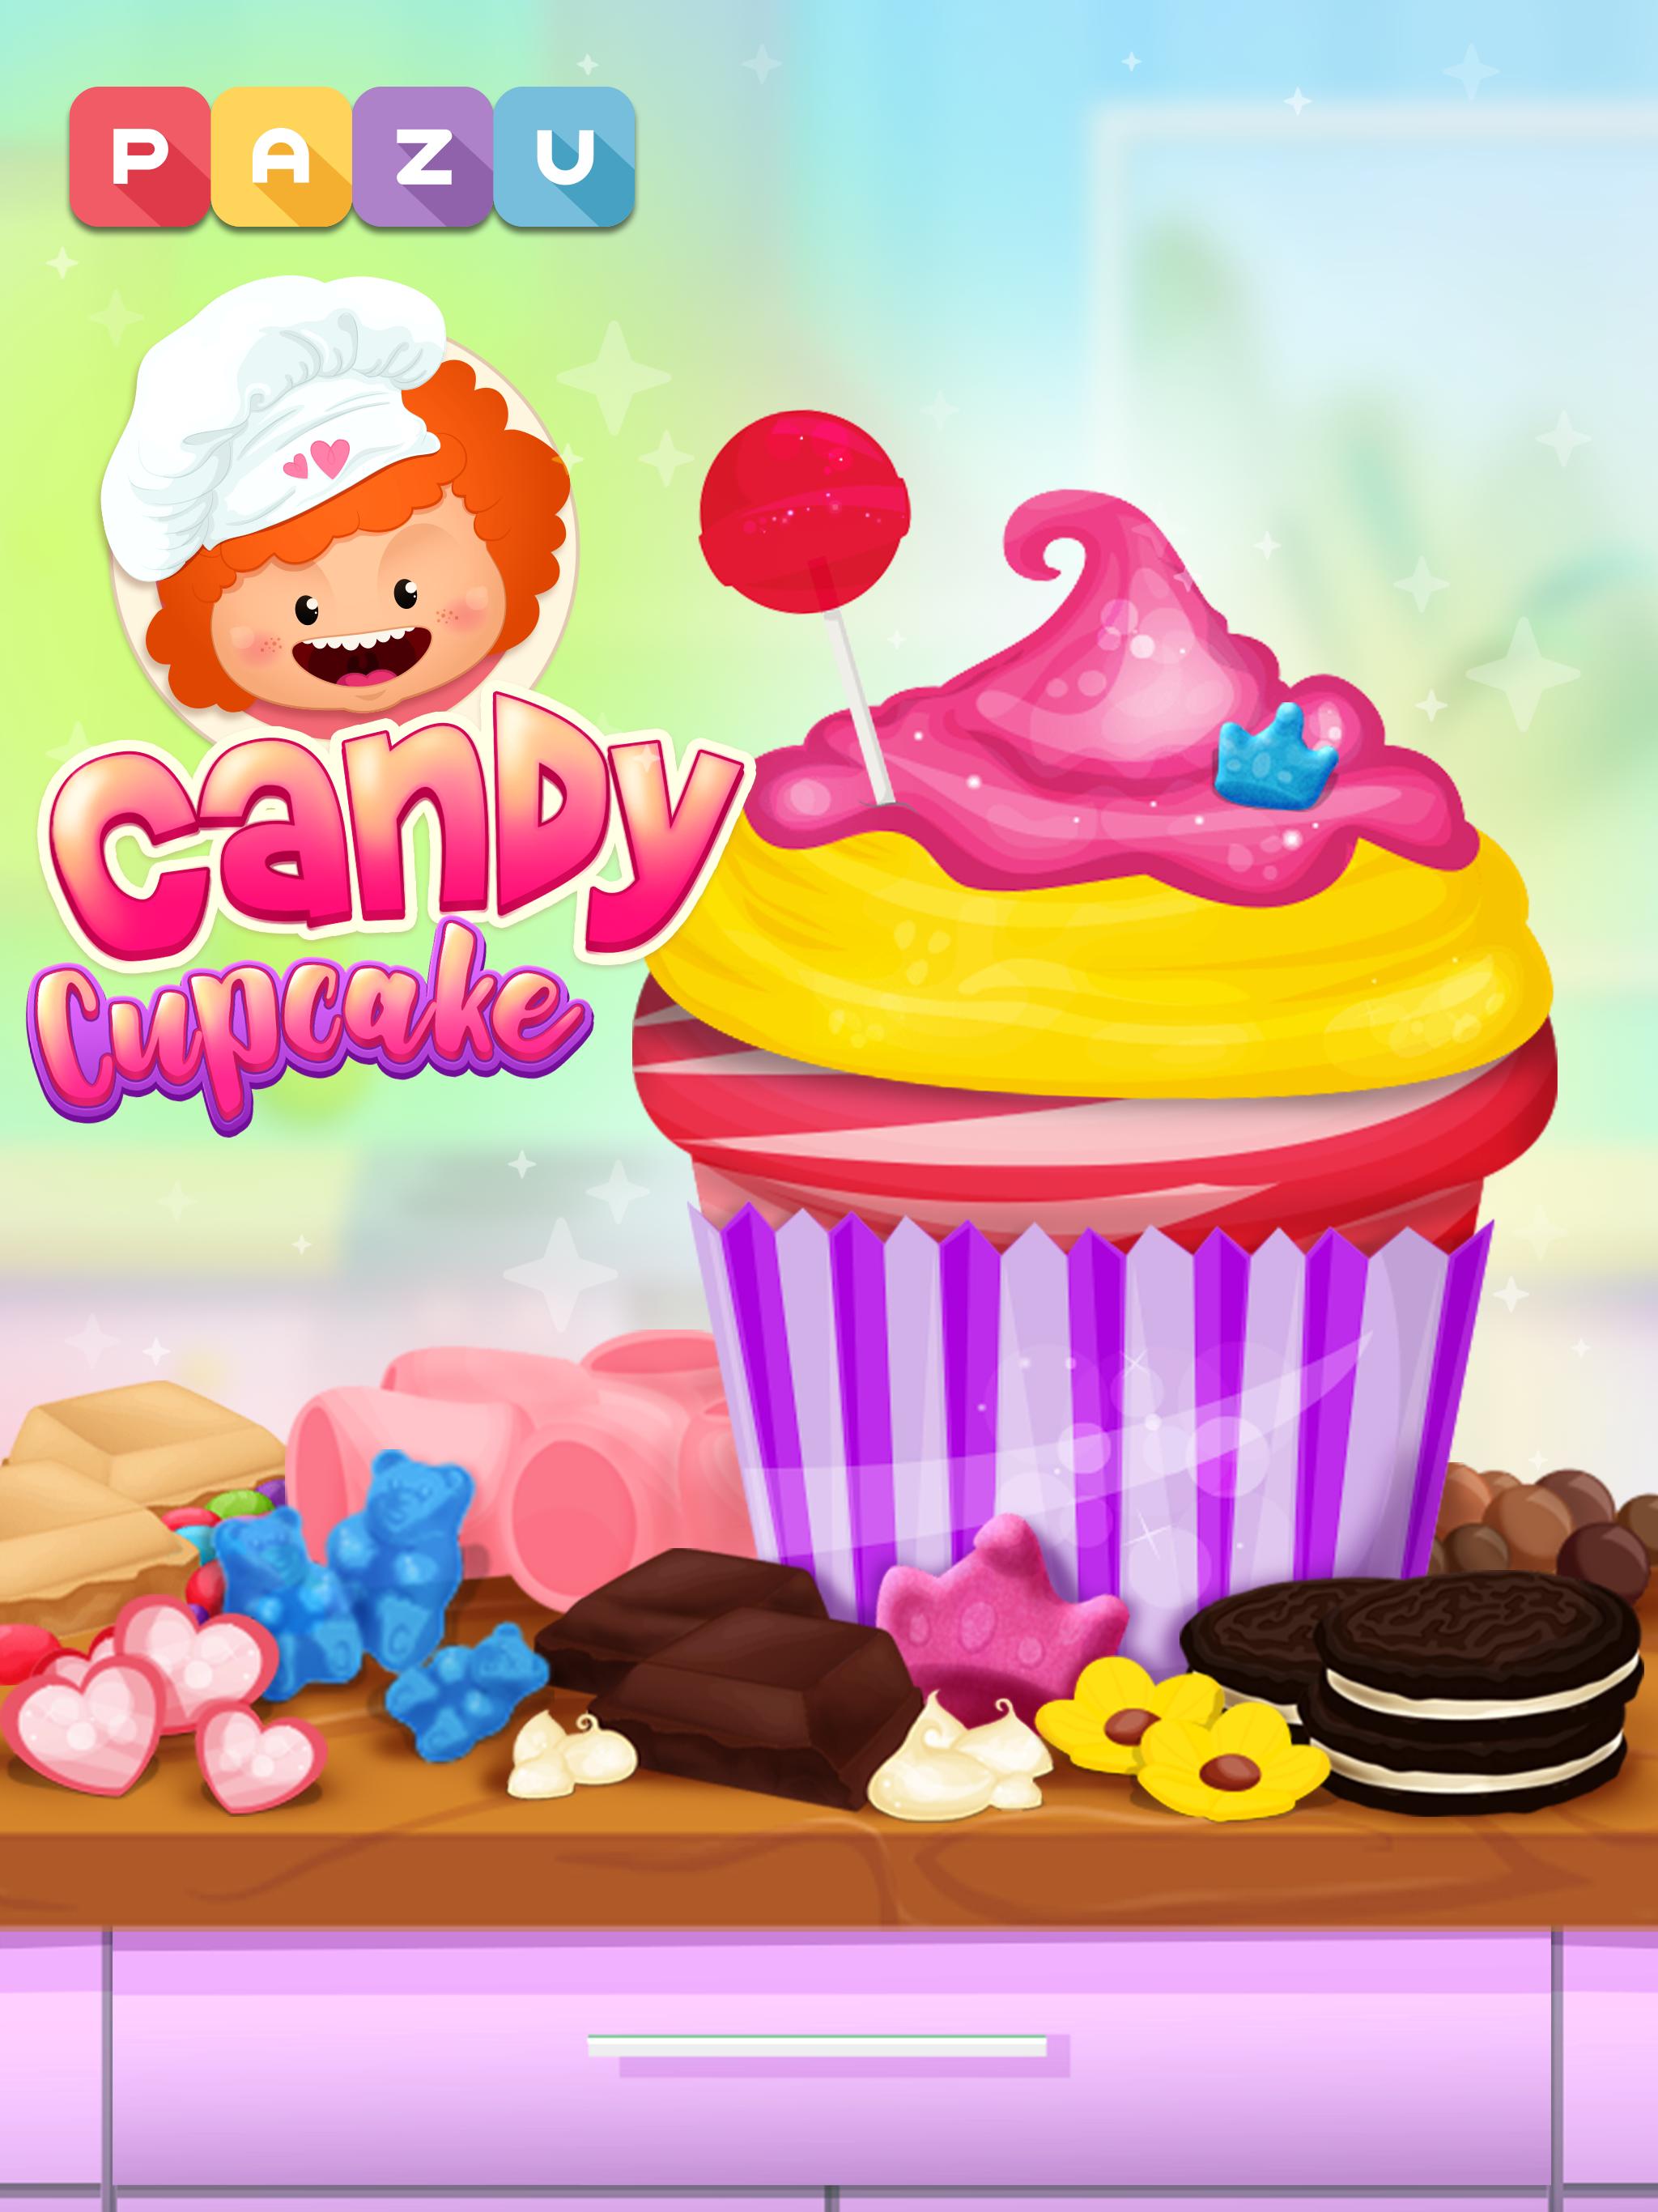 Cupcakes cooking and baking games for kids for Android - APK Download